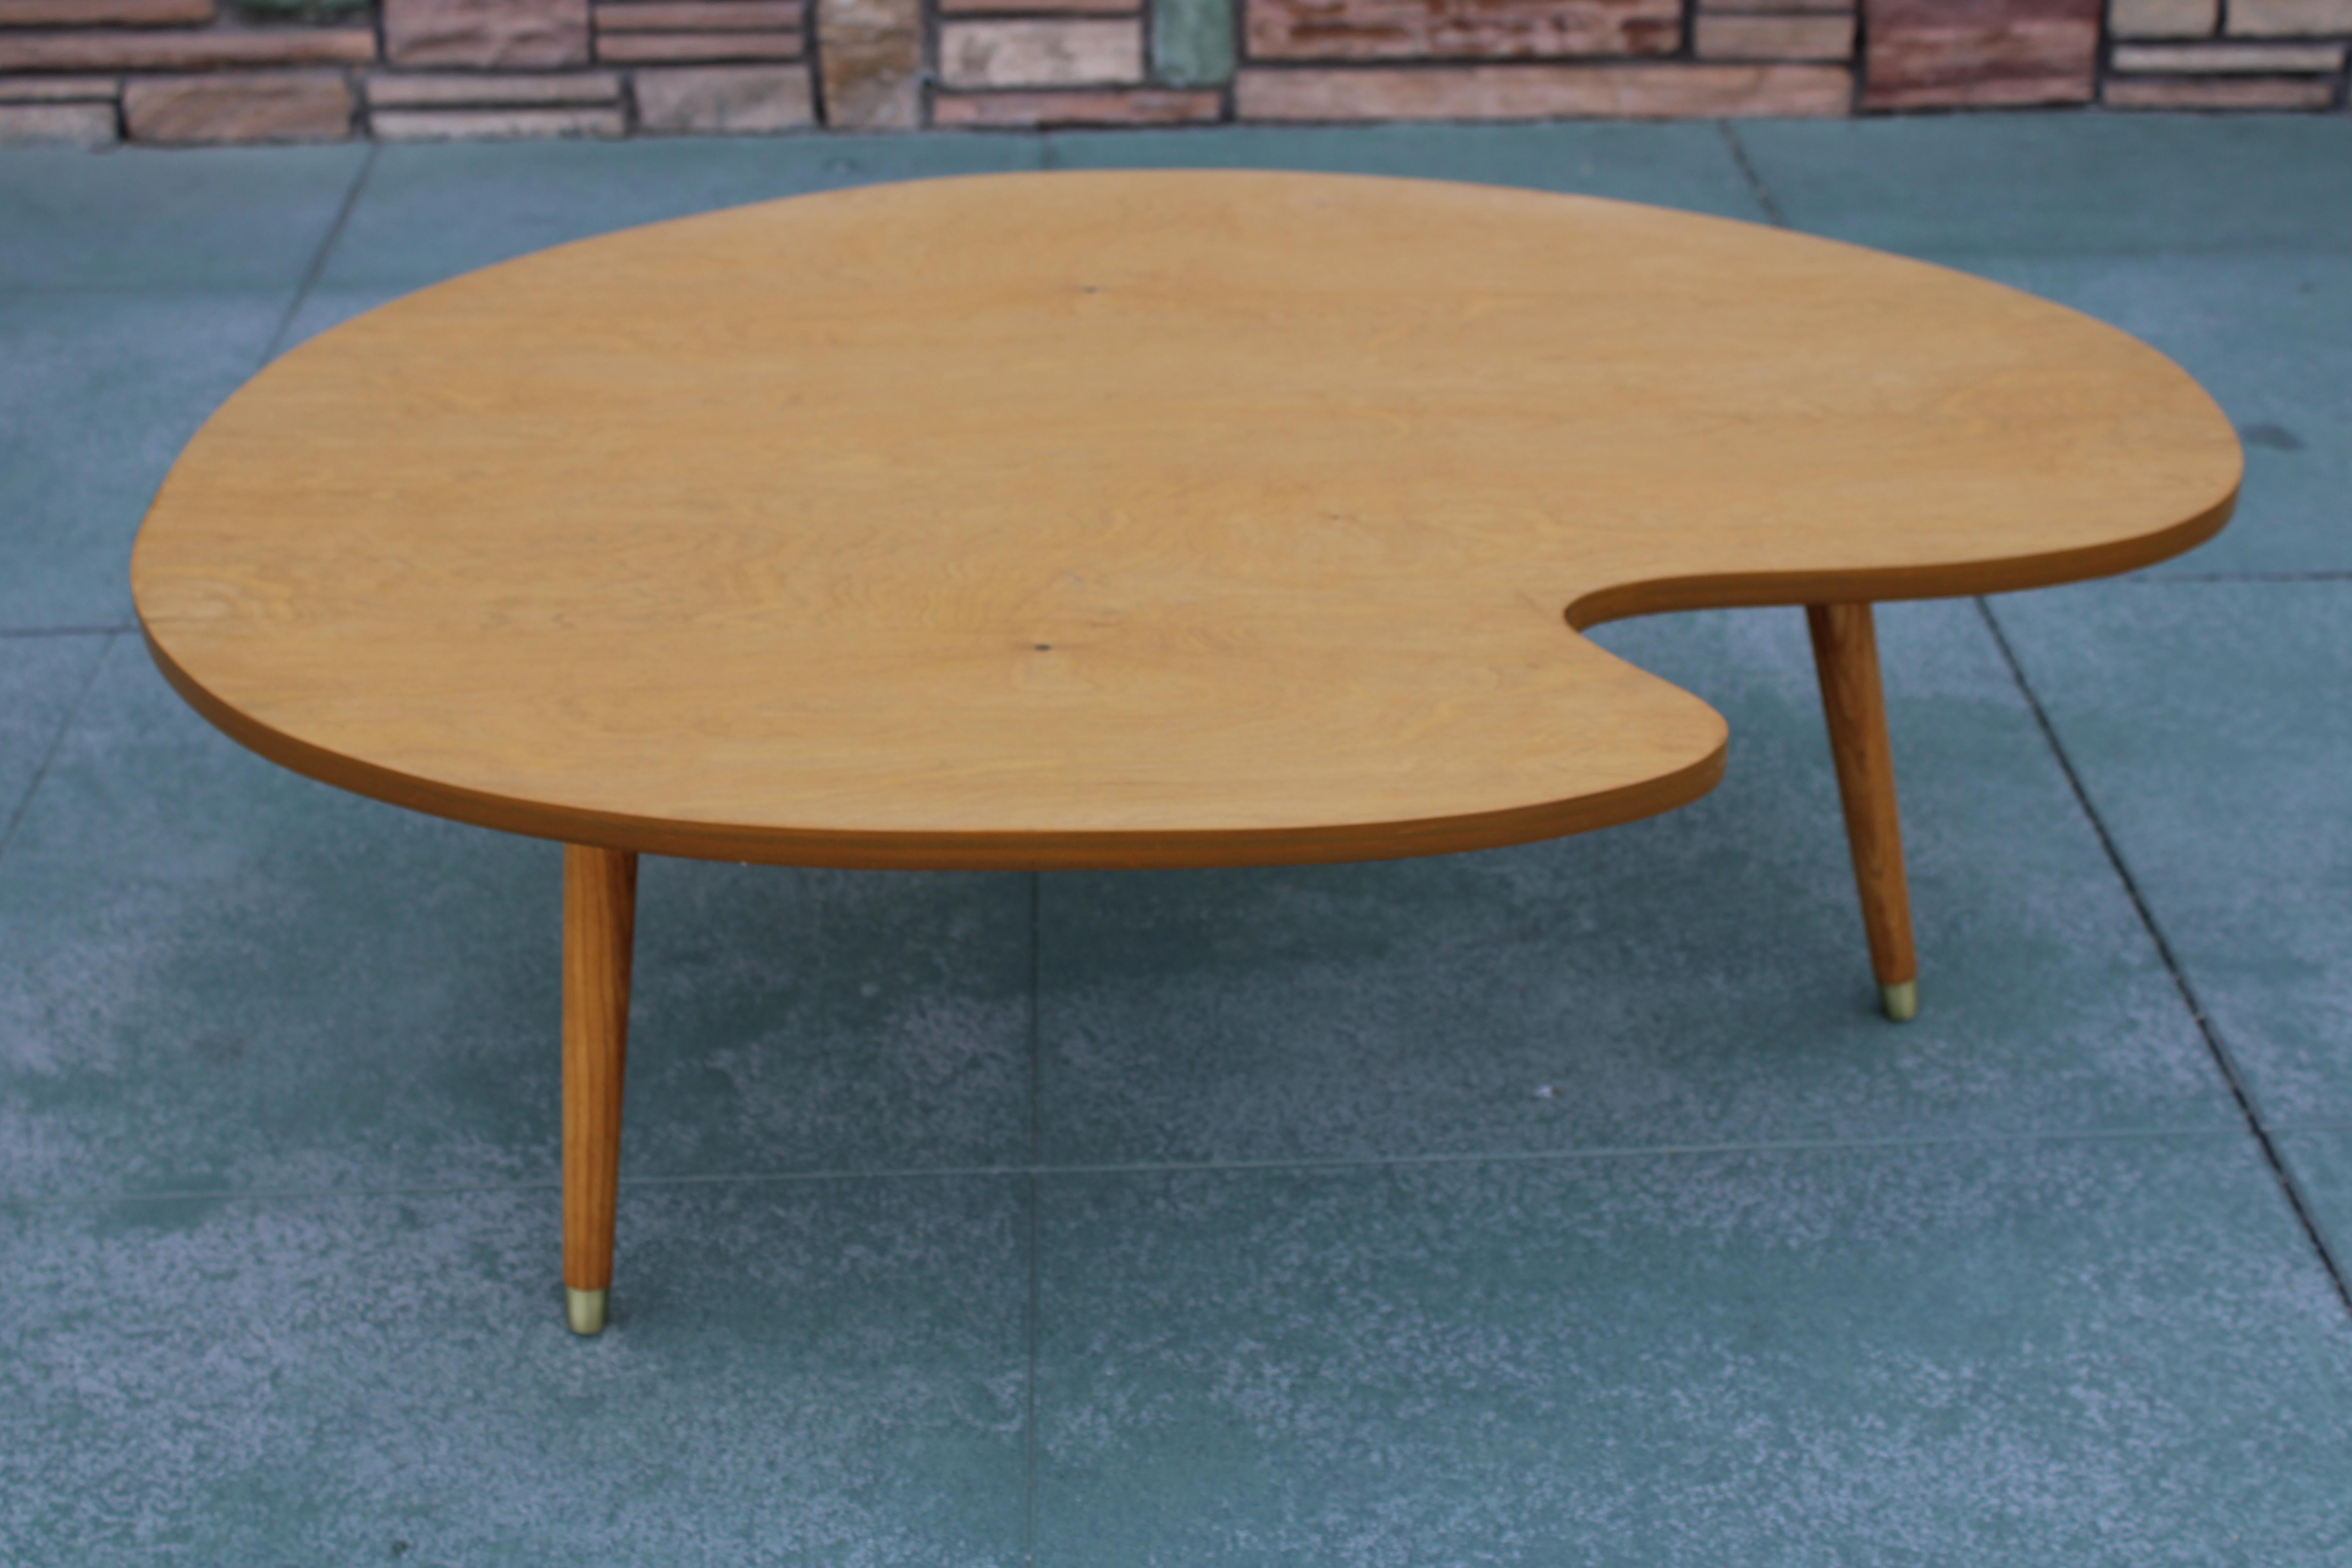 A late 40s to early 50s blonde wood coffee table with an artist's palette shaped top and tapered wood legs. Table measures 48